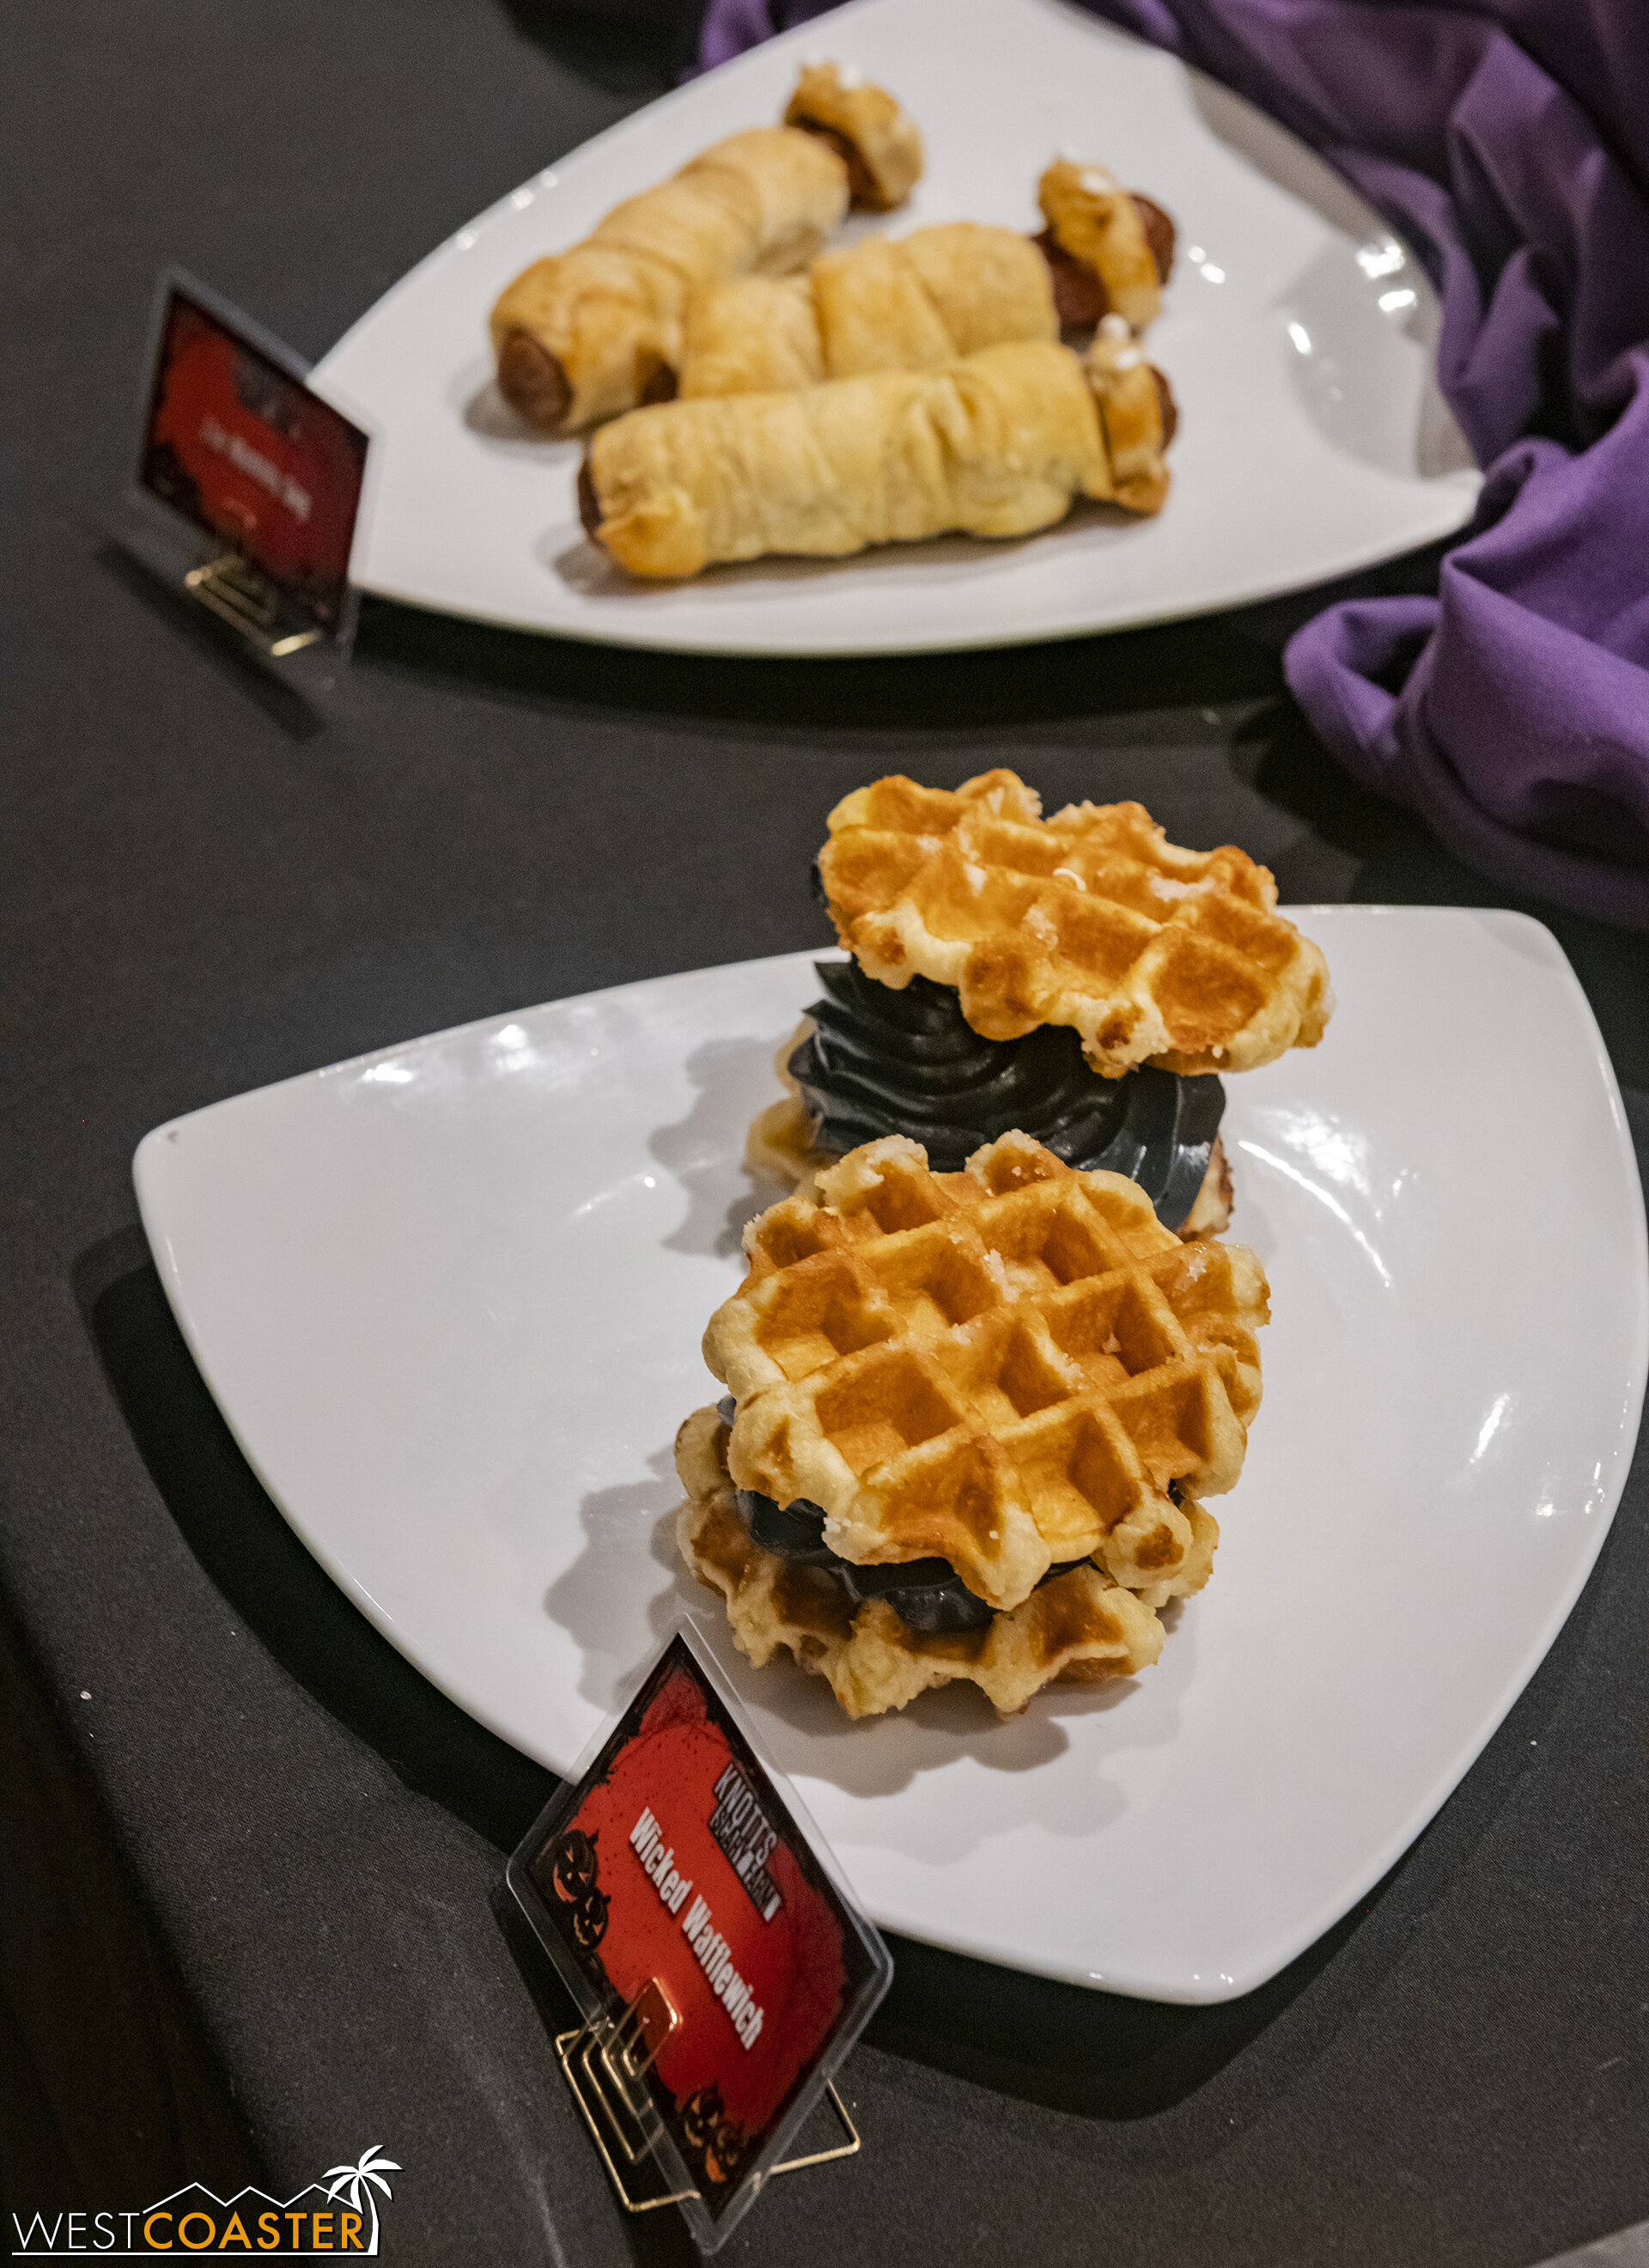  They didn’t have the Wicked Wafflewich to try, though I wish they did! 